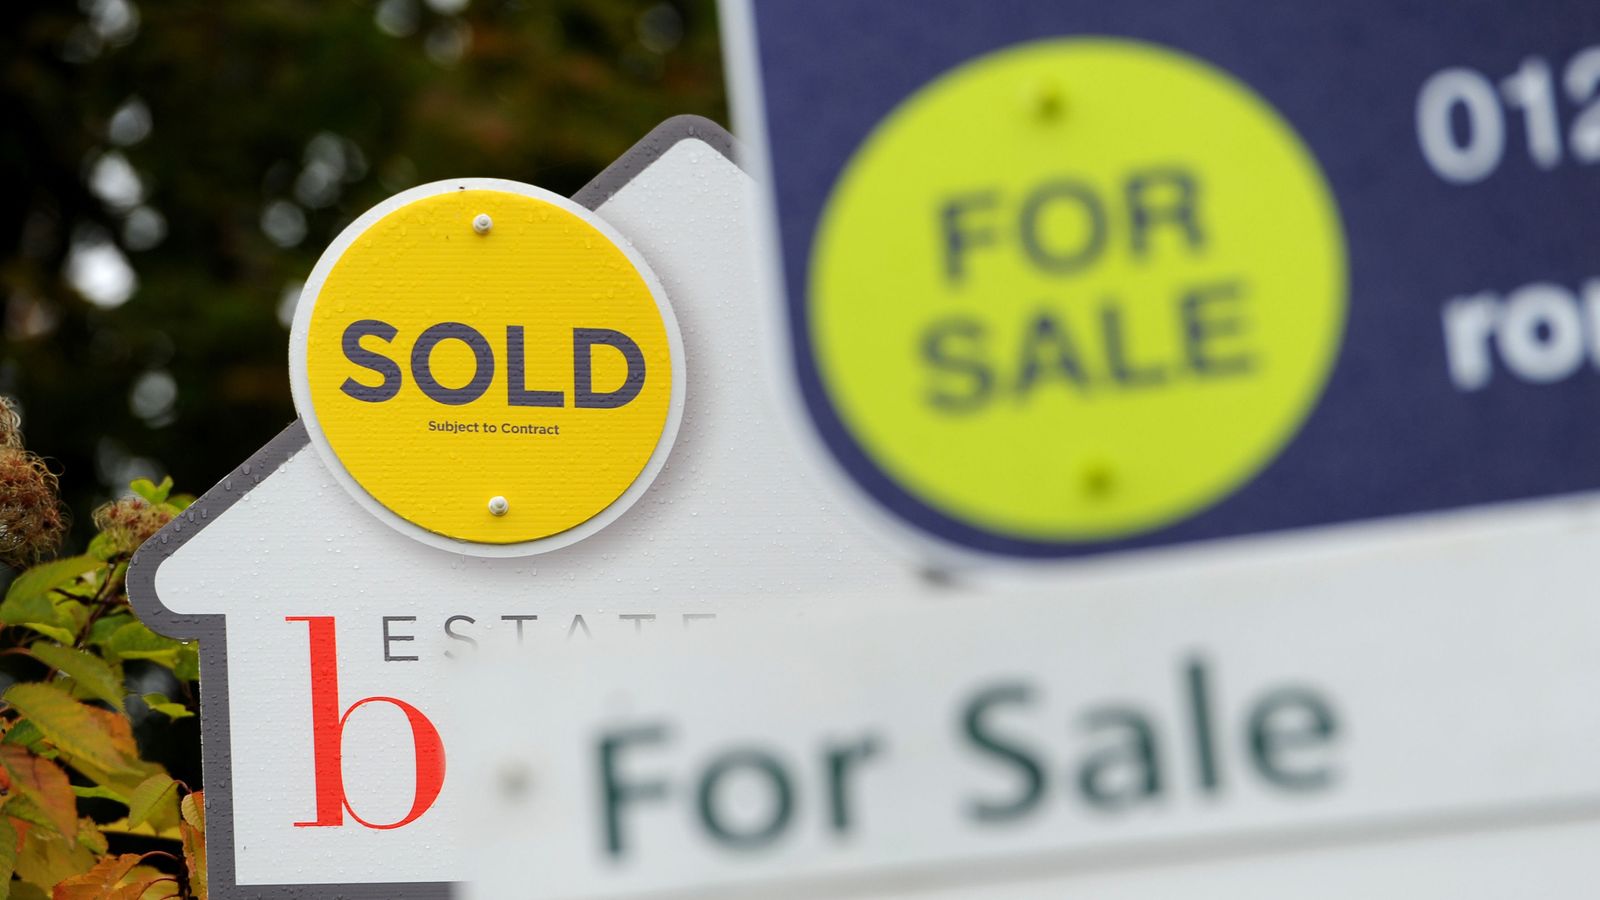 Cost of living: 'Surprising amount of momentum' for housing market as prices hit new record